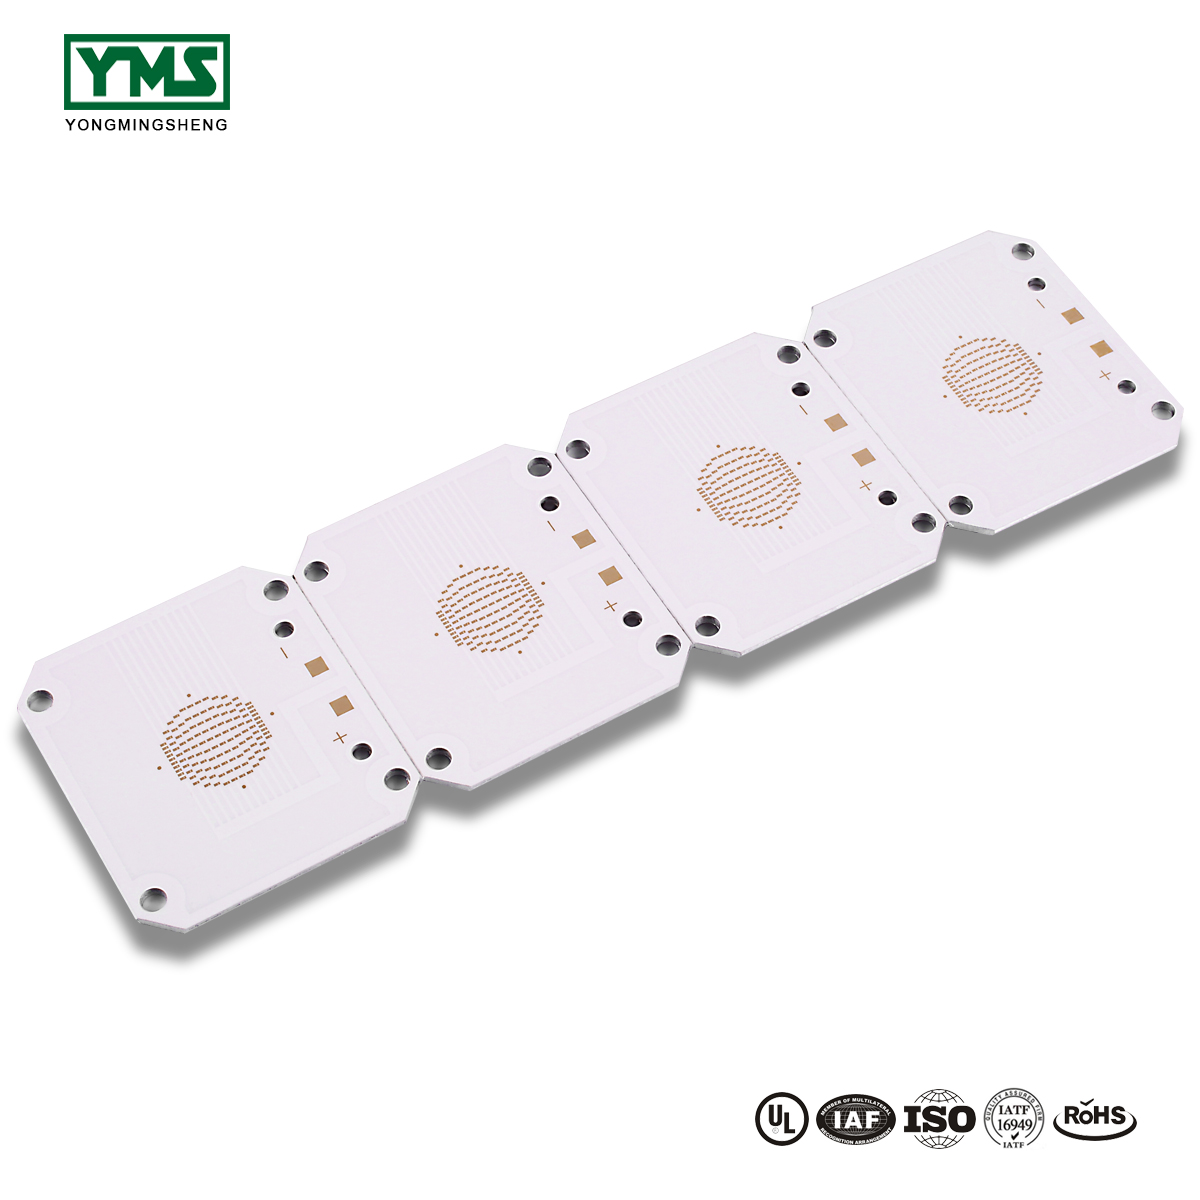 Leading Manufacturer for Stk4050 Printed Circuit Board - 1Layer Aluminum base Board | YMSPCB – Yongmingsheng